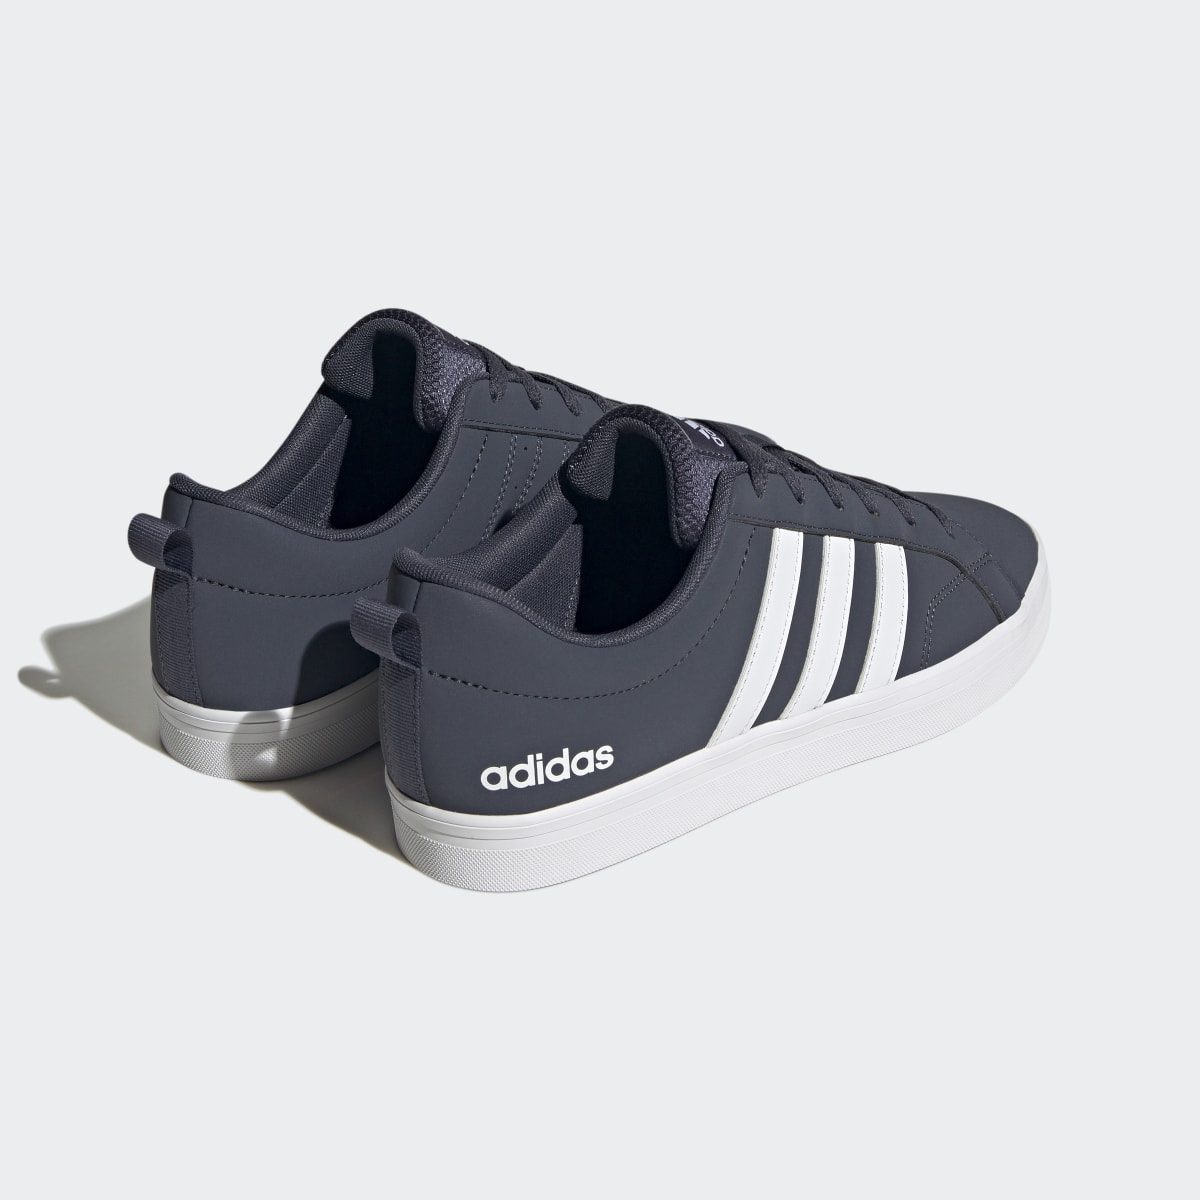 Adidas VS Pace 2.0 Lifestyle Skateboarding Shoes. 6